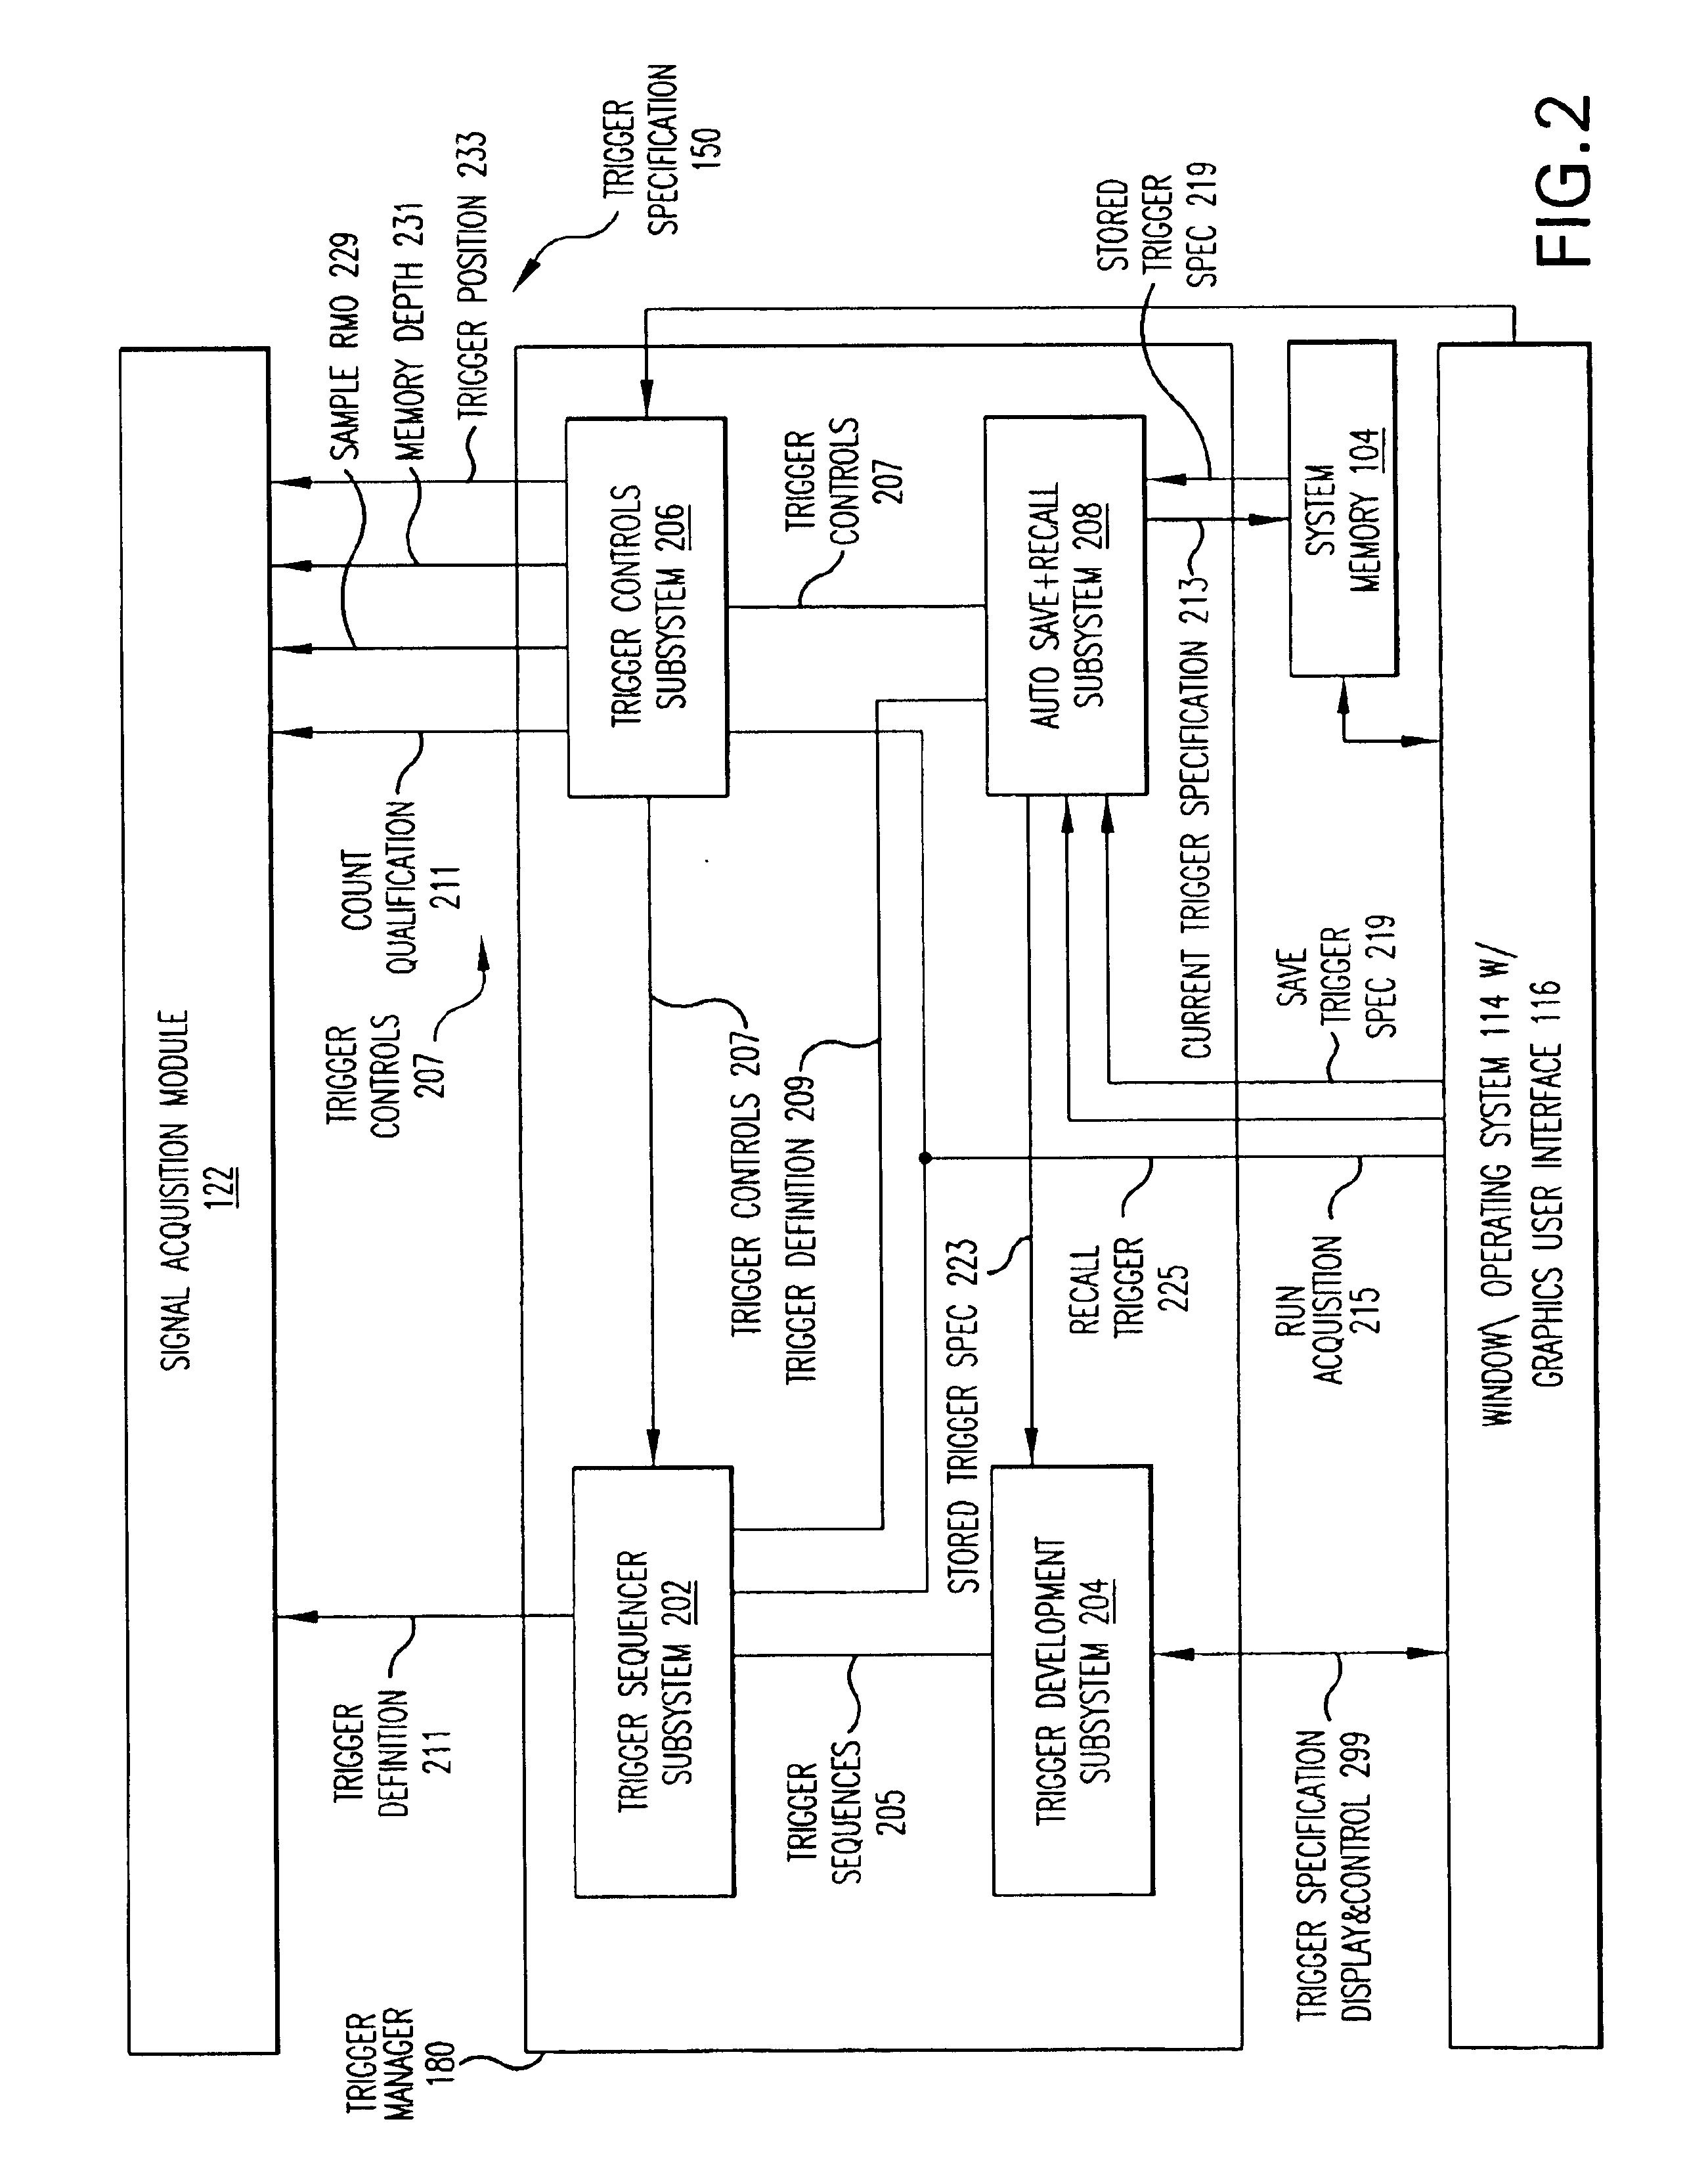 System and method for configuring a logic analyzer to trigger on data communications packets and protocols